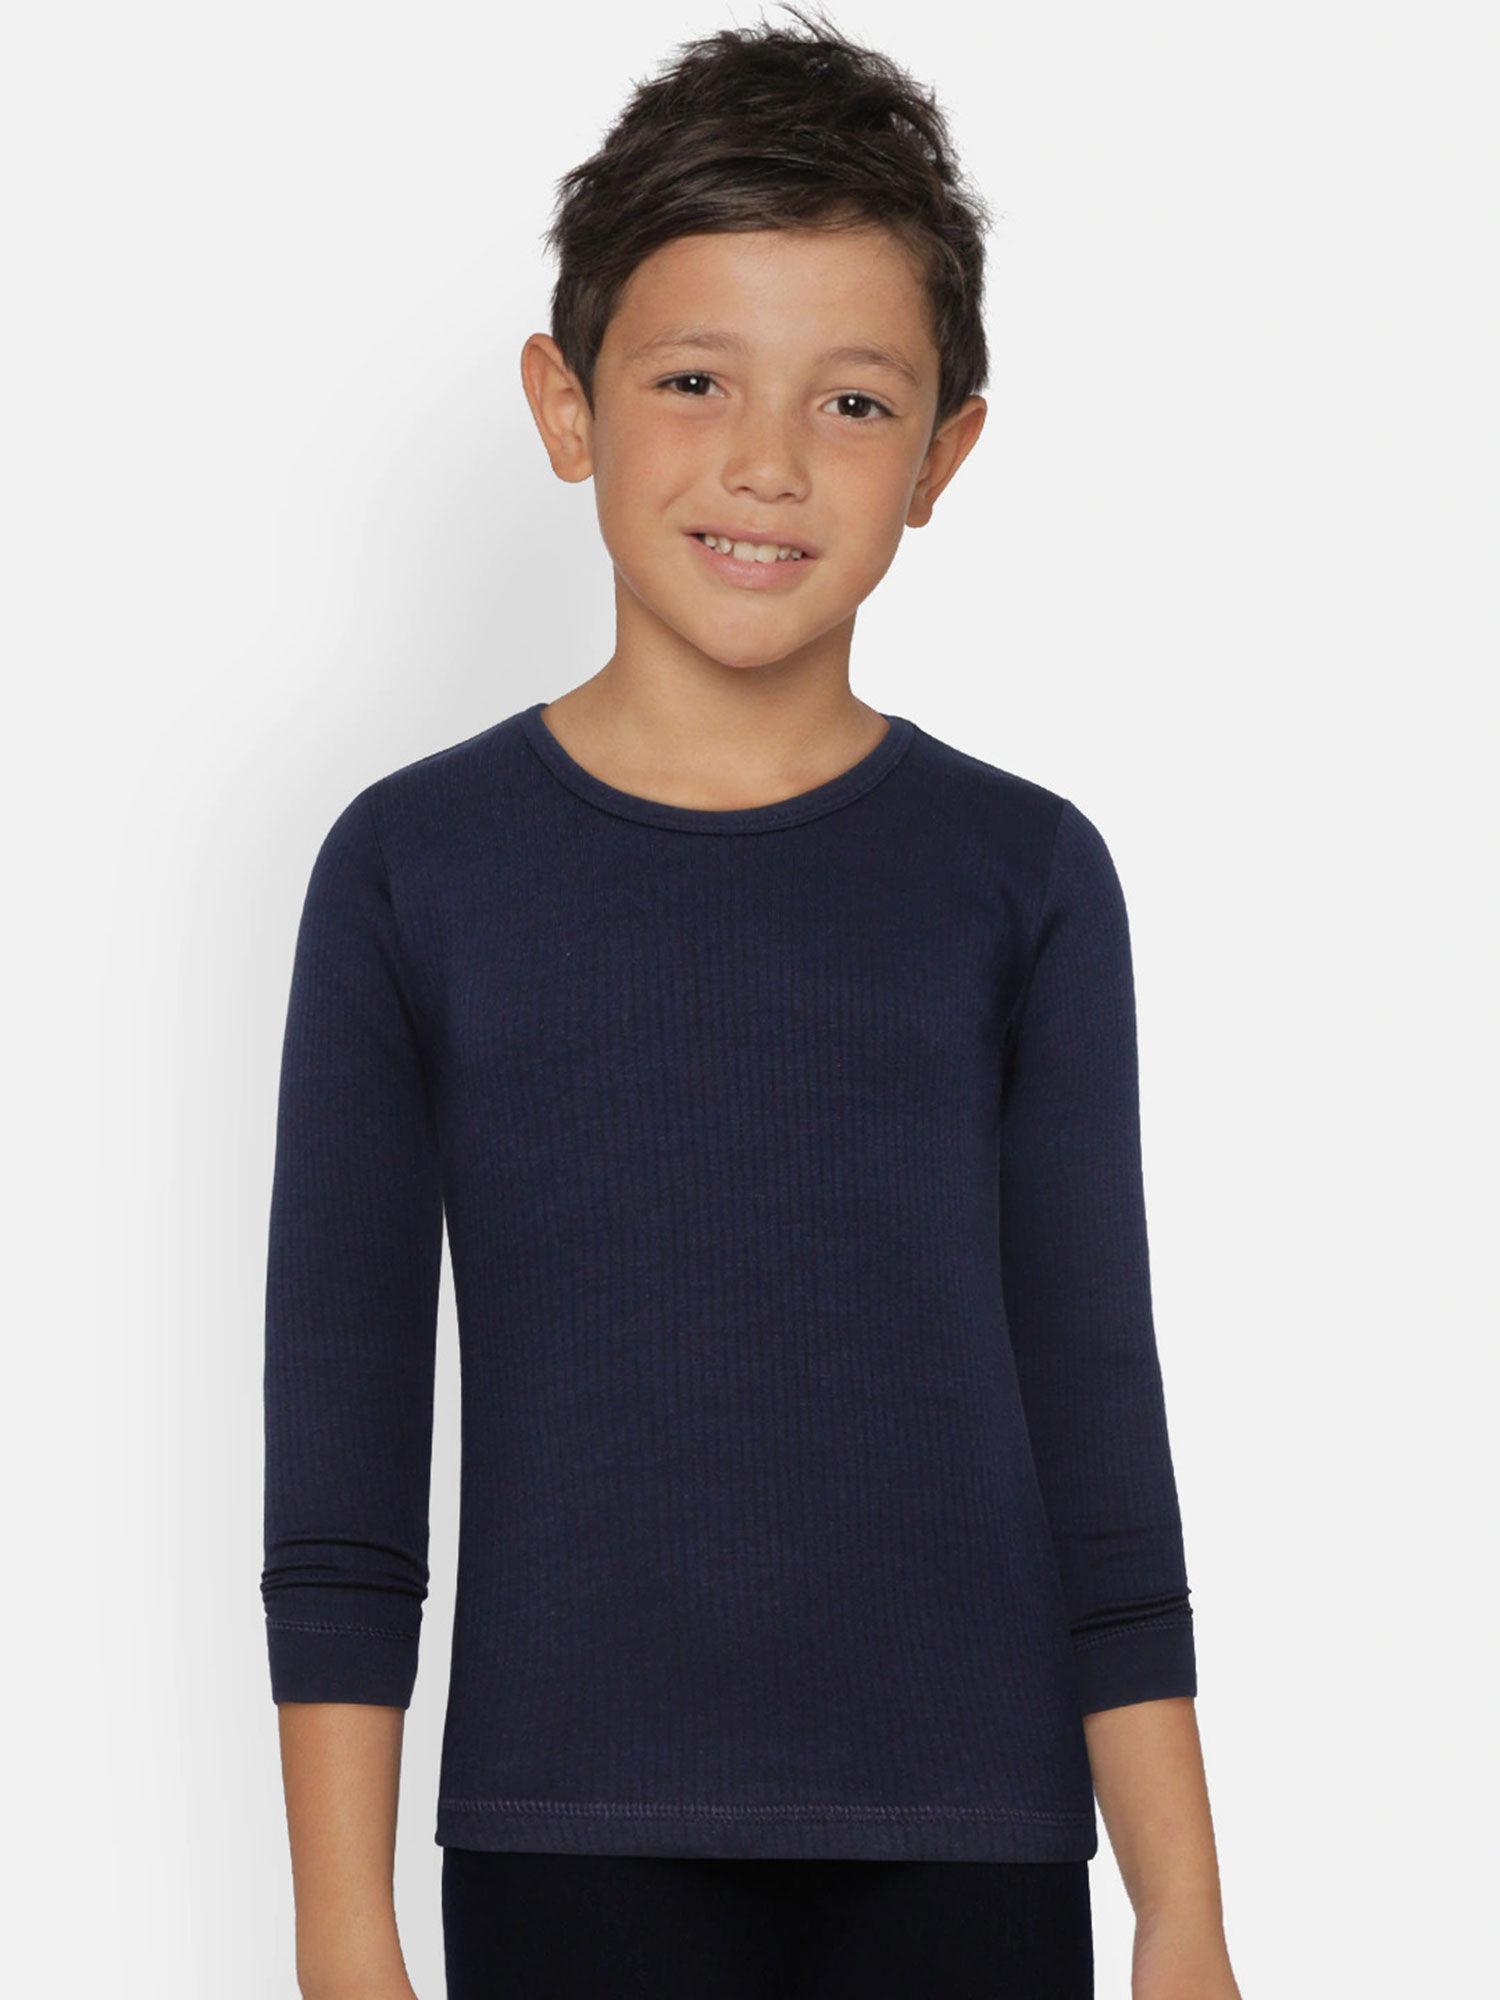 boys navy blue thermal tops (pack of 2)